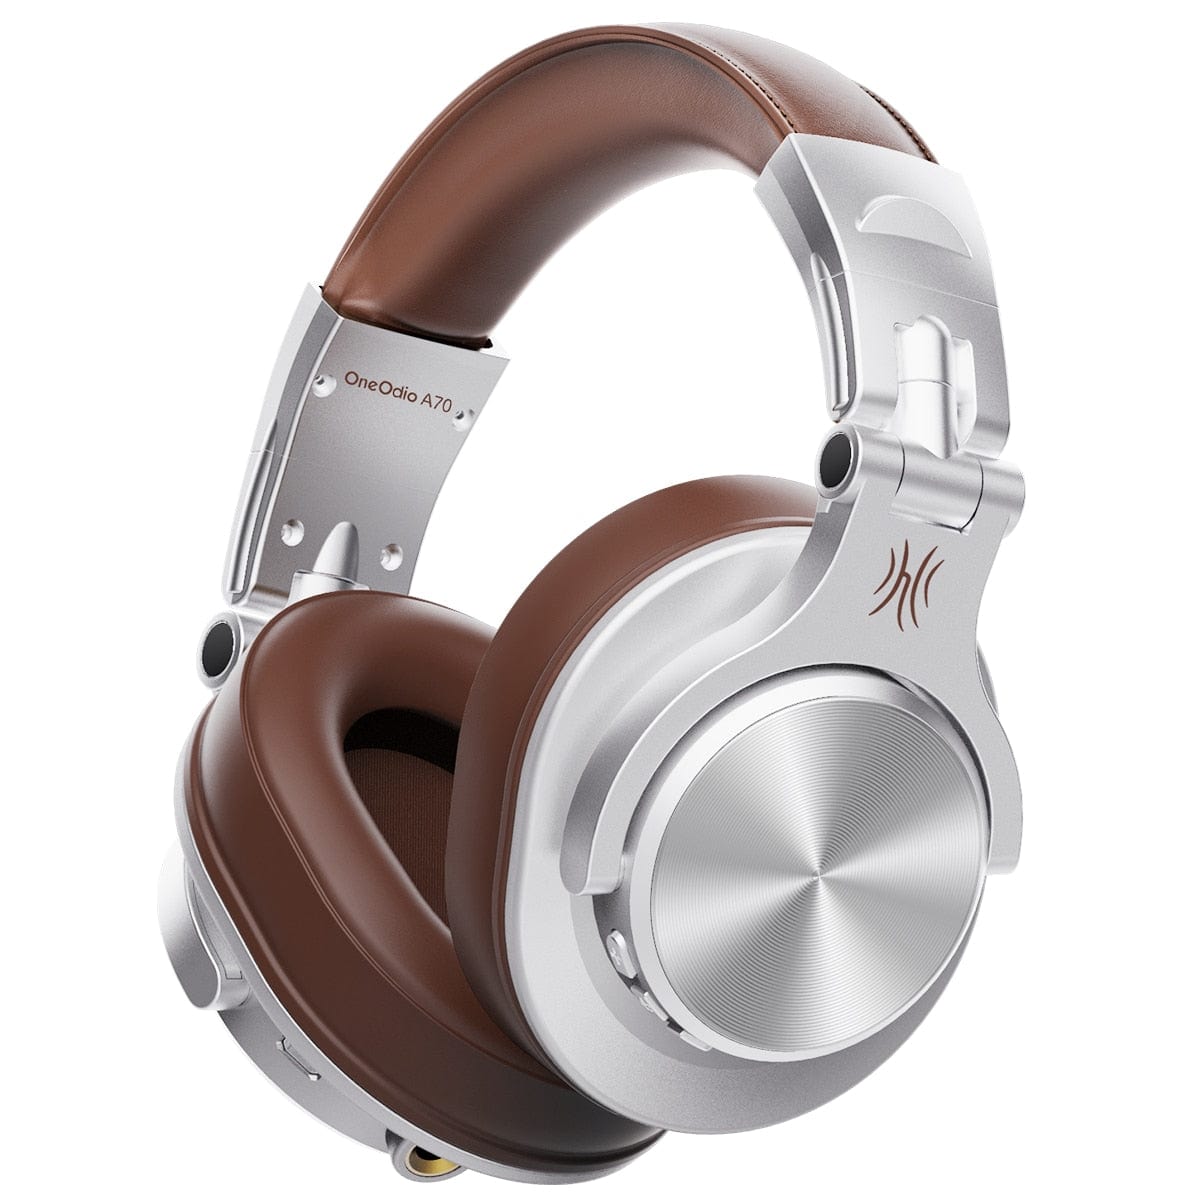 OneOdio OneOdio Wireless Headphone, Version A70, Supports Bluetooth 5.2, Playtime up to 72 Hours, Color Silver brown